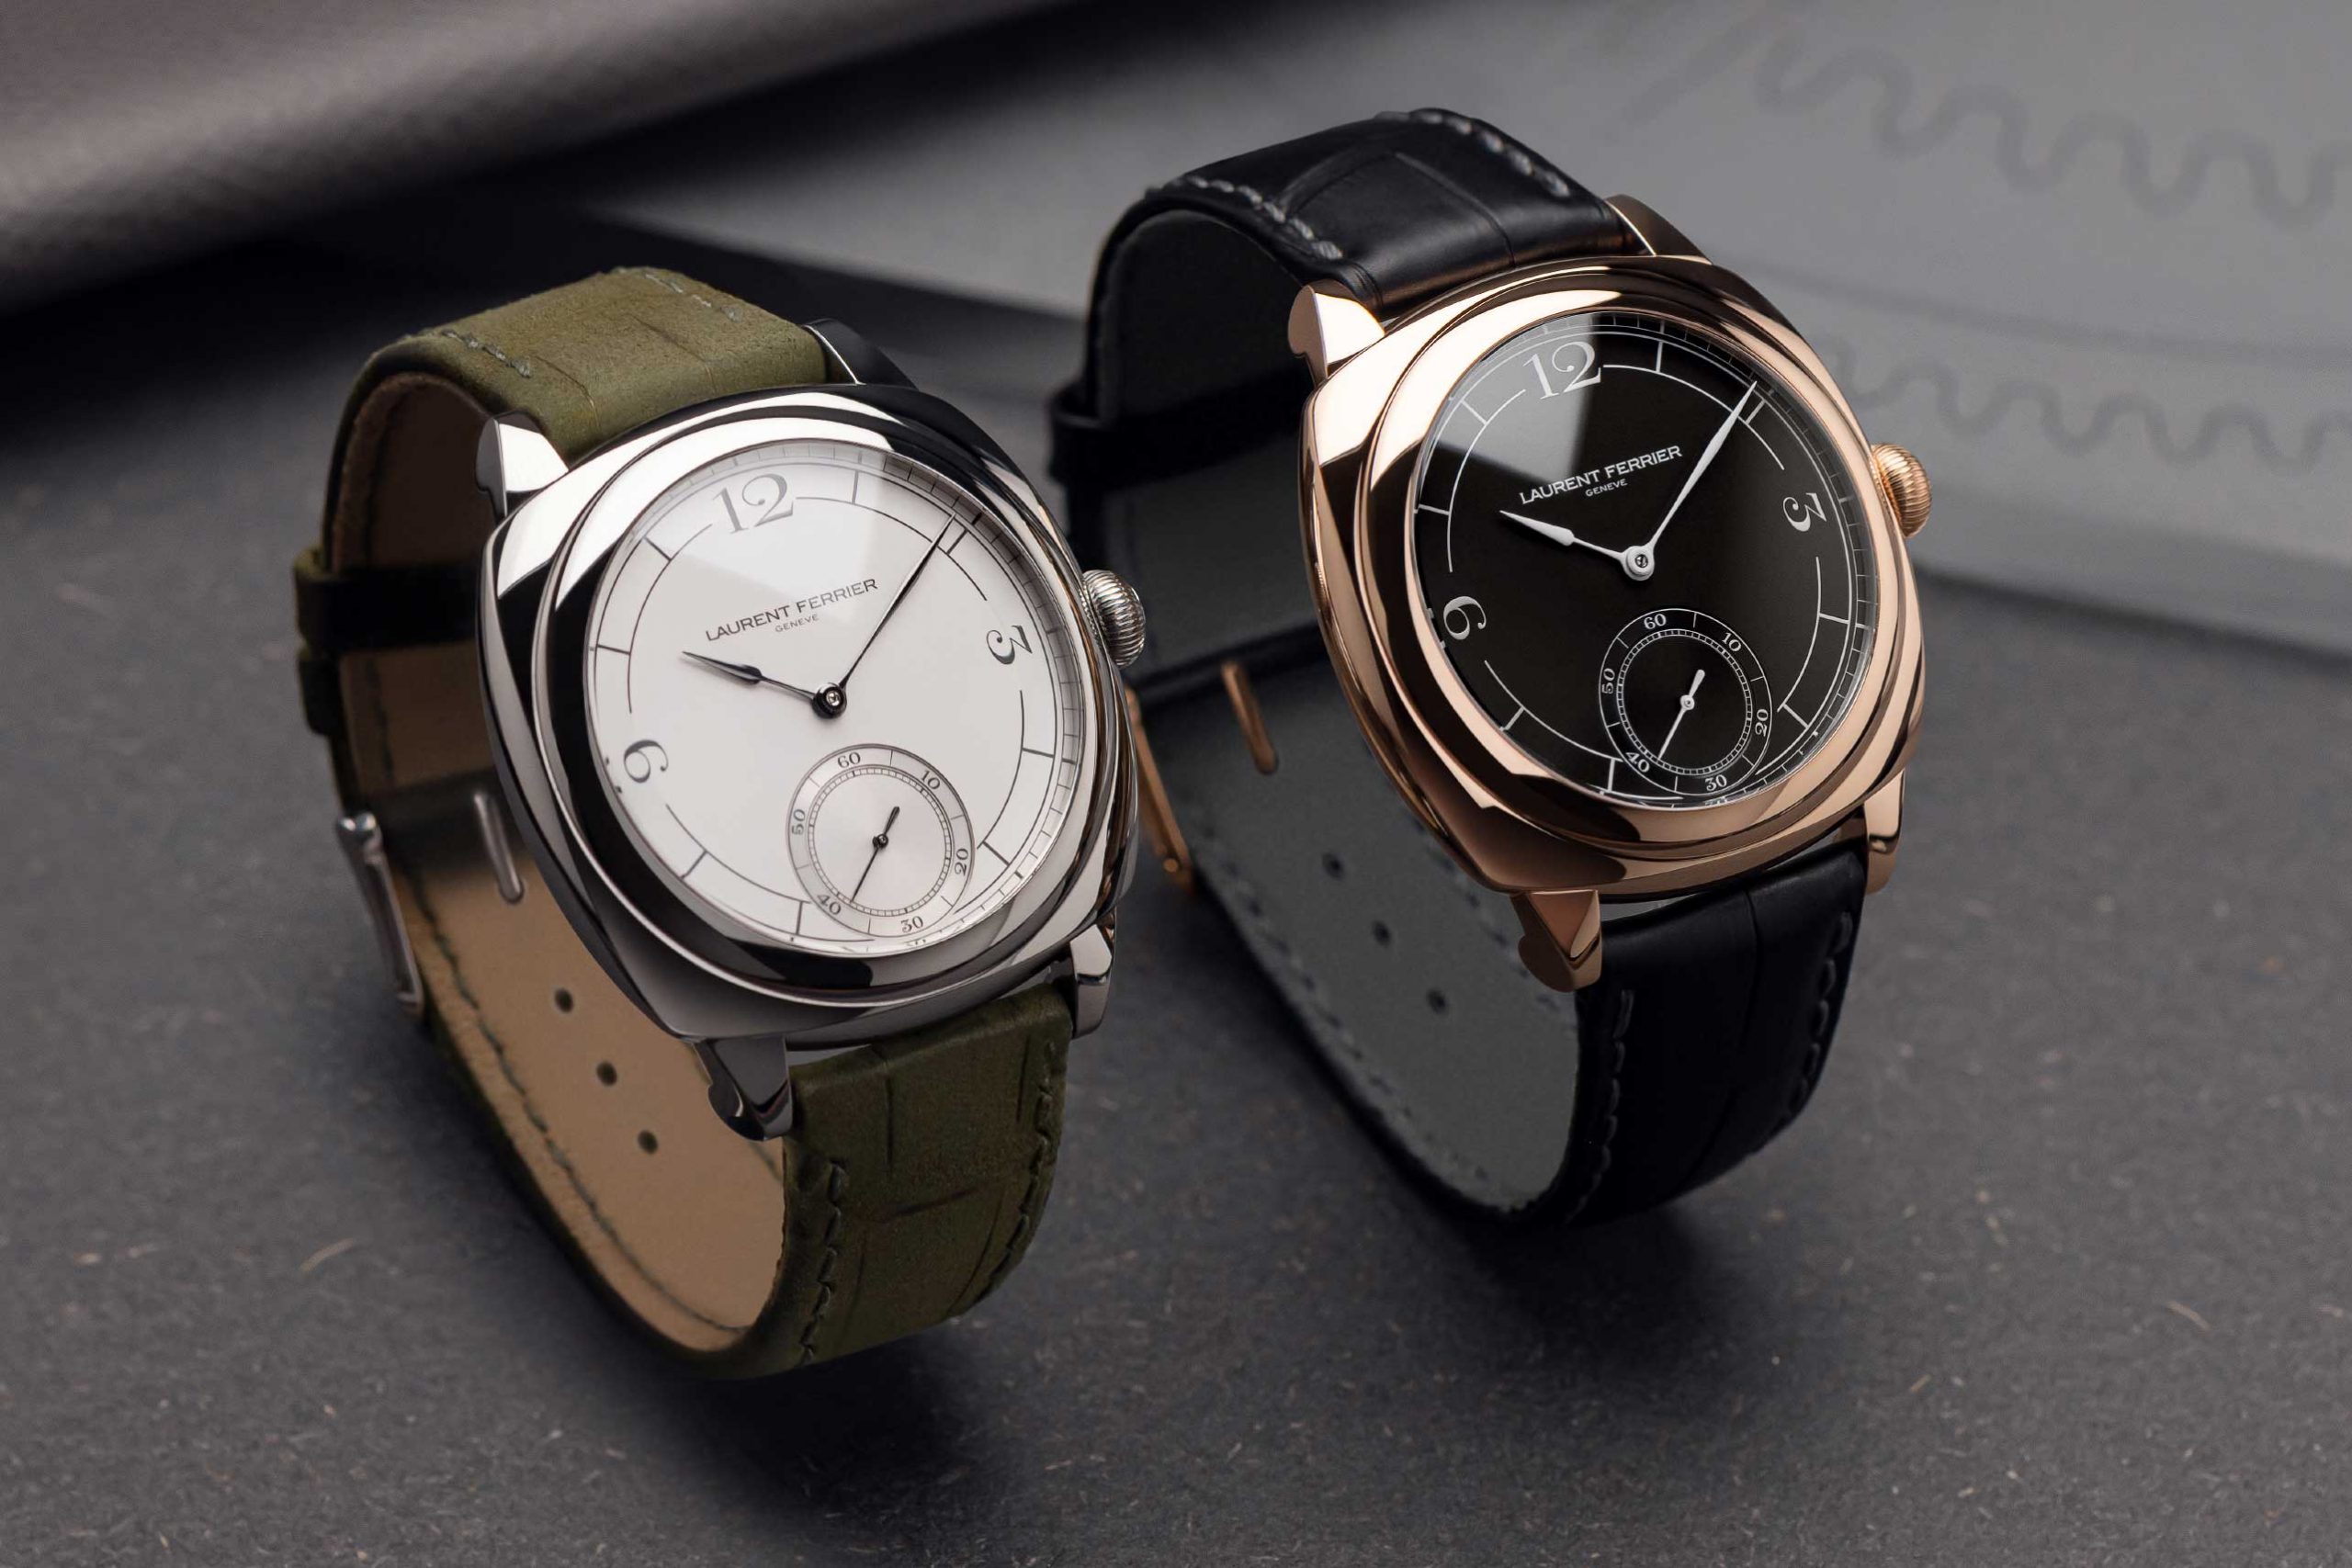 Introducing Laurent Ferrier’s Square Micro-Rotor with Fresh New Dials